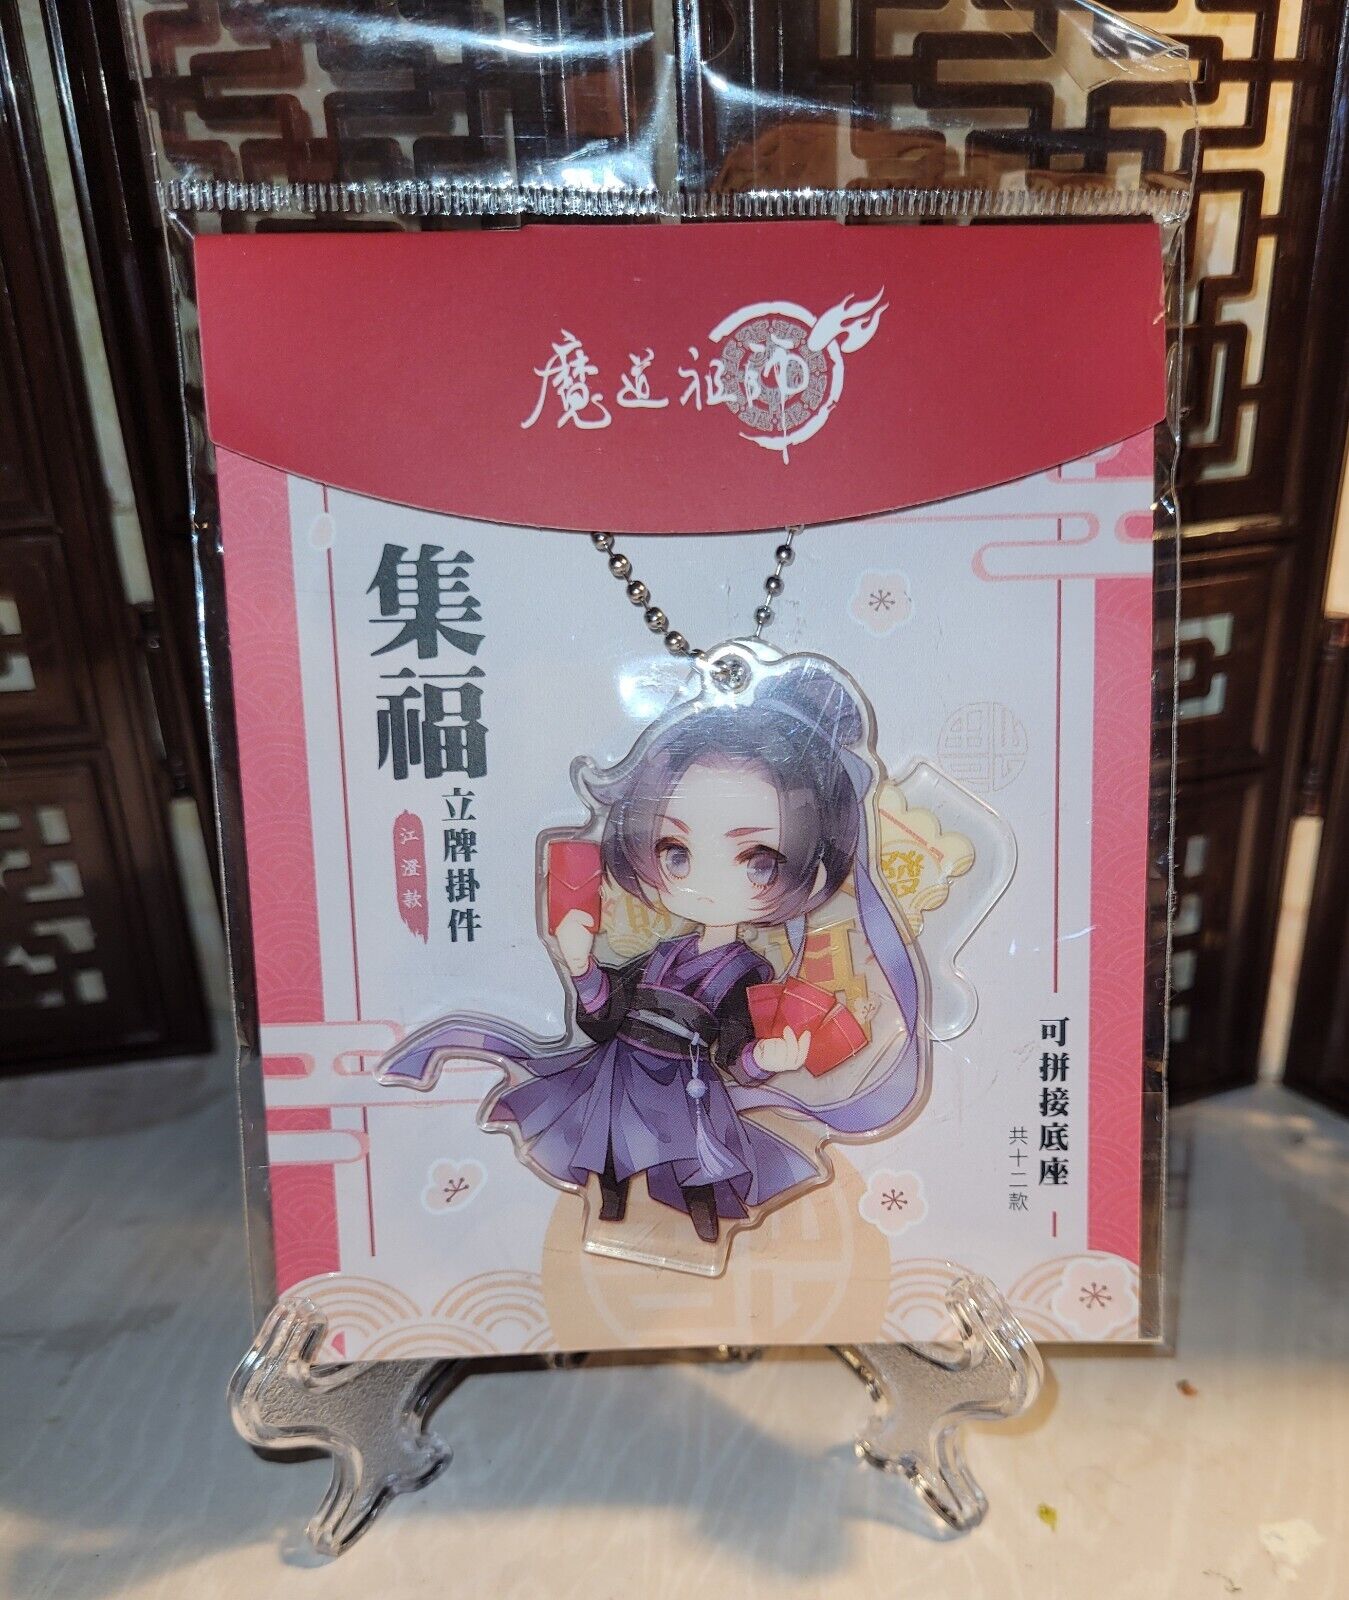 Official Jiang Cheng Small Keychain/standee *US SELLER*